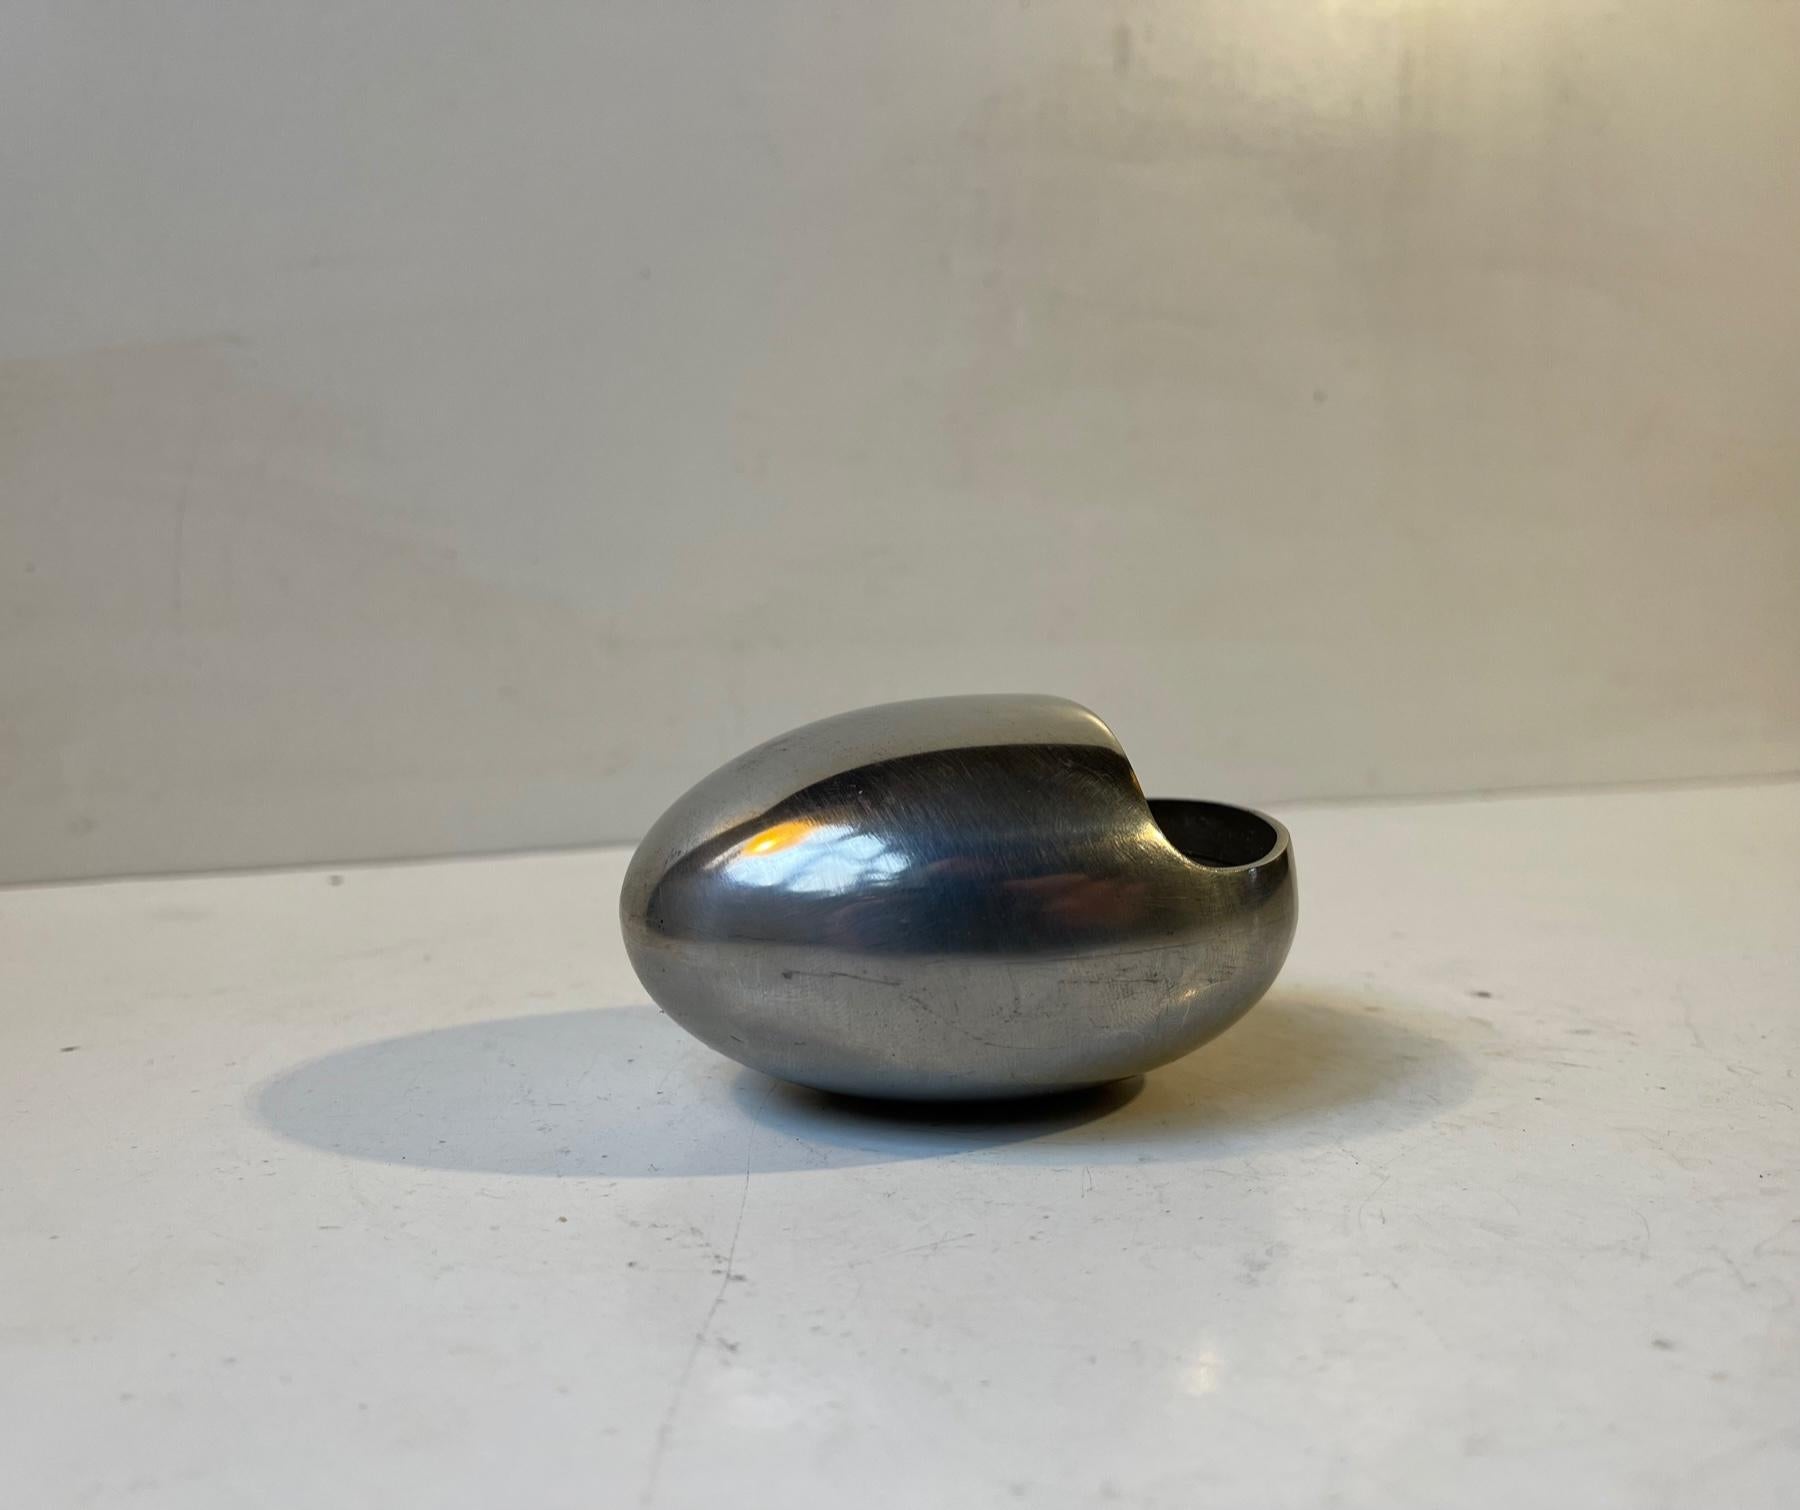 Egg shaped stainless steel ashtray. Very rare in this metal composition - brushed stainless. It is called the smile and was designed by Hans Bunde and manufactured by Carl Cohr in Fredericia Denmark during the 1950s. Stamped Cohr, Denmark - to the